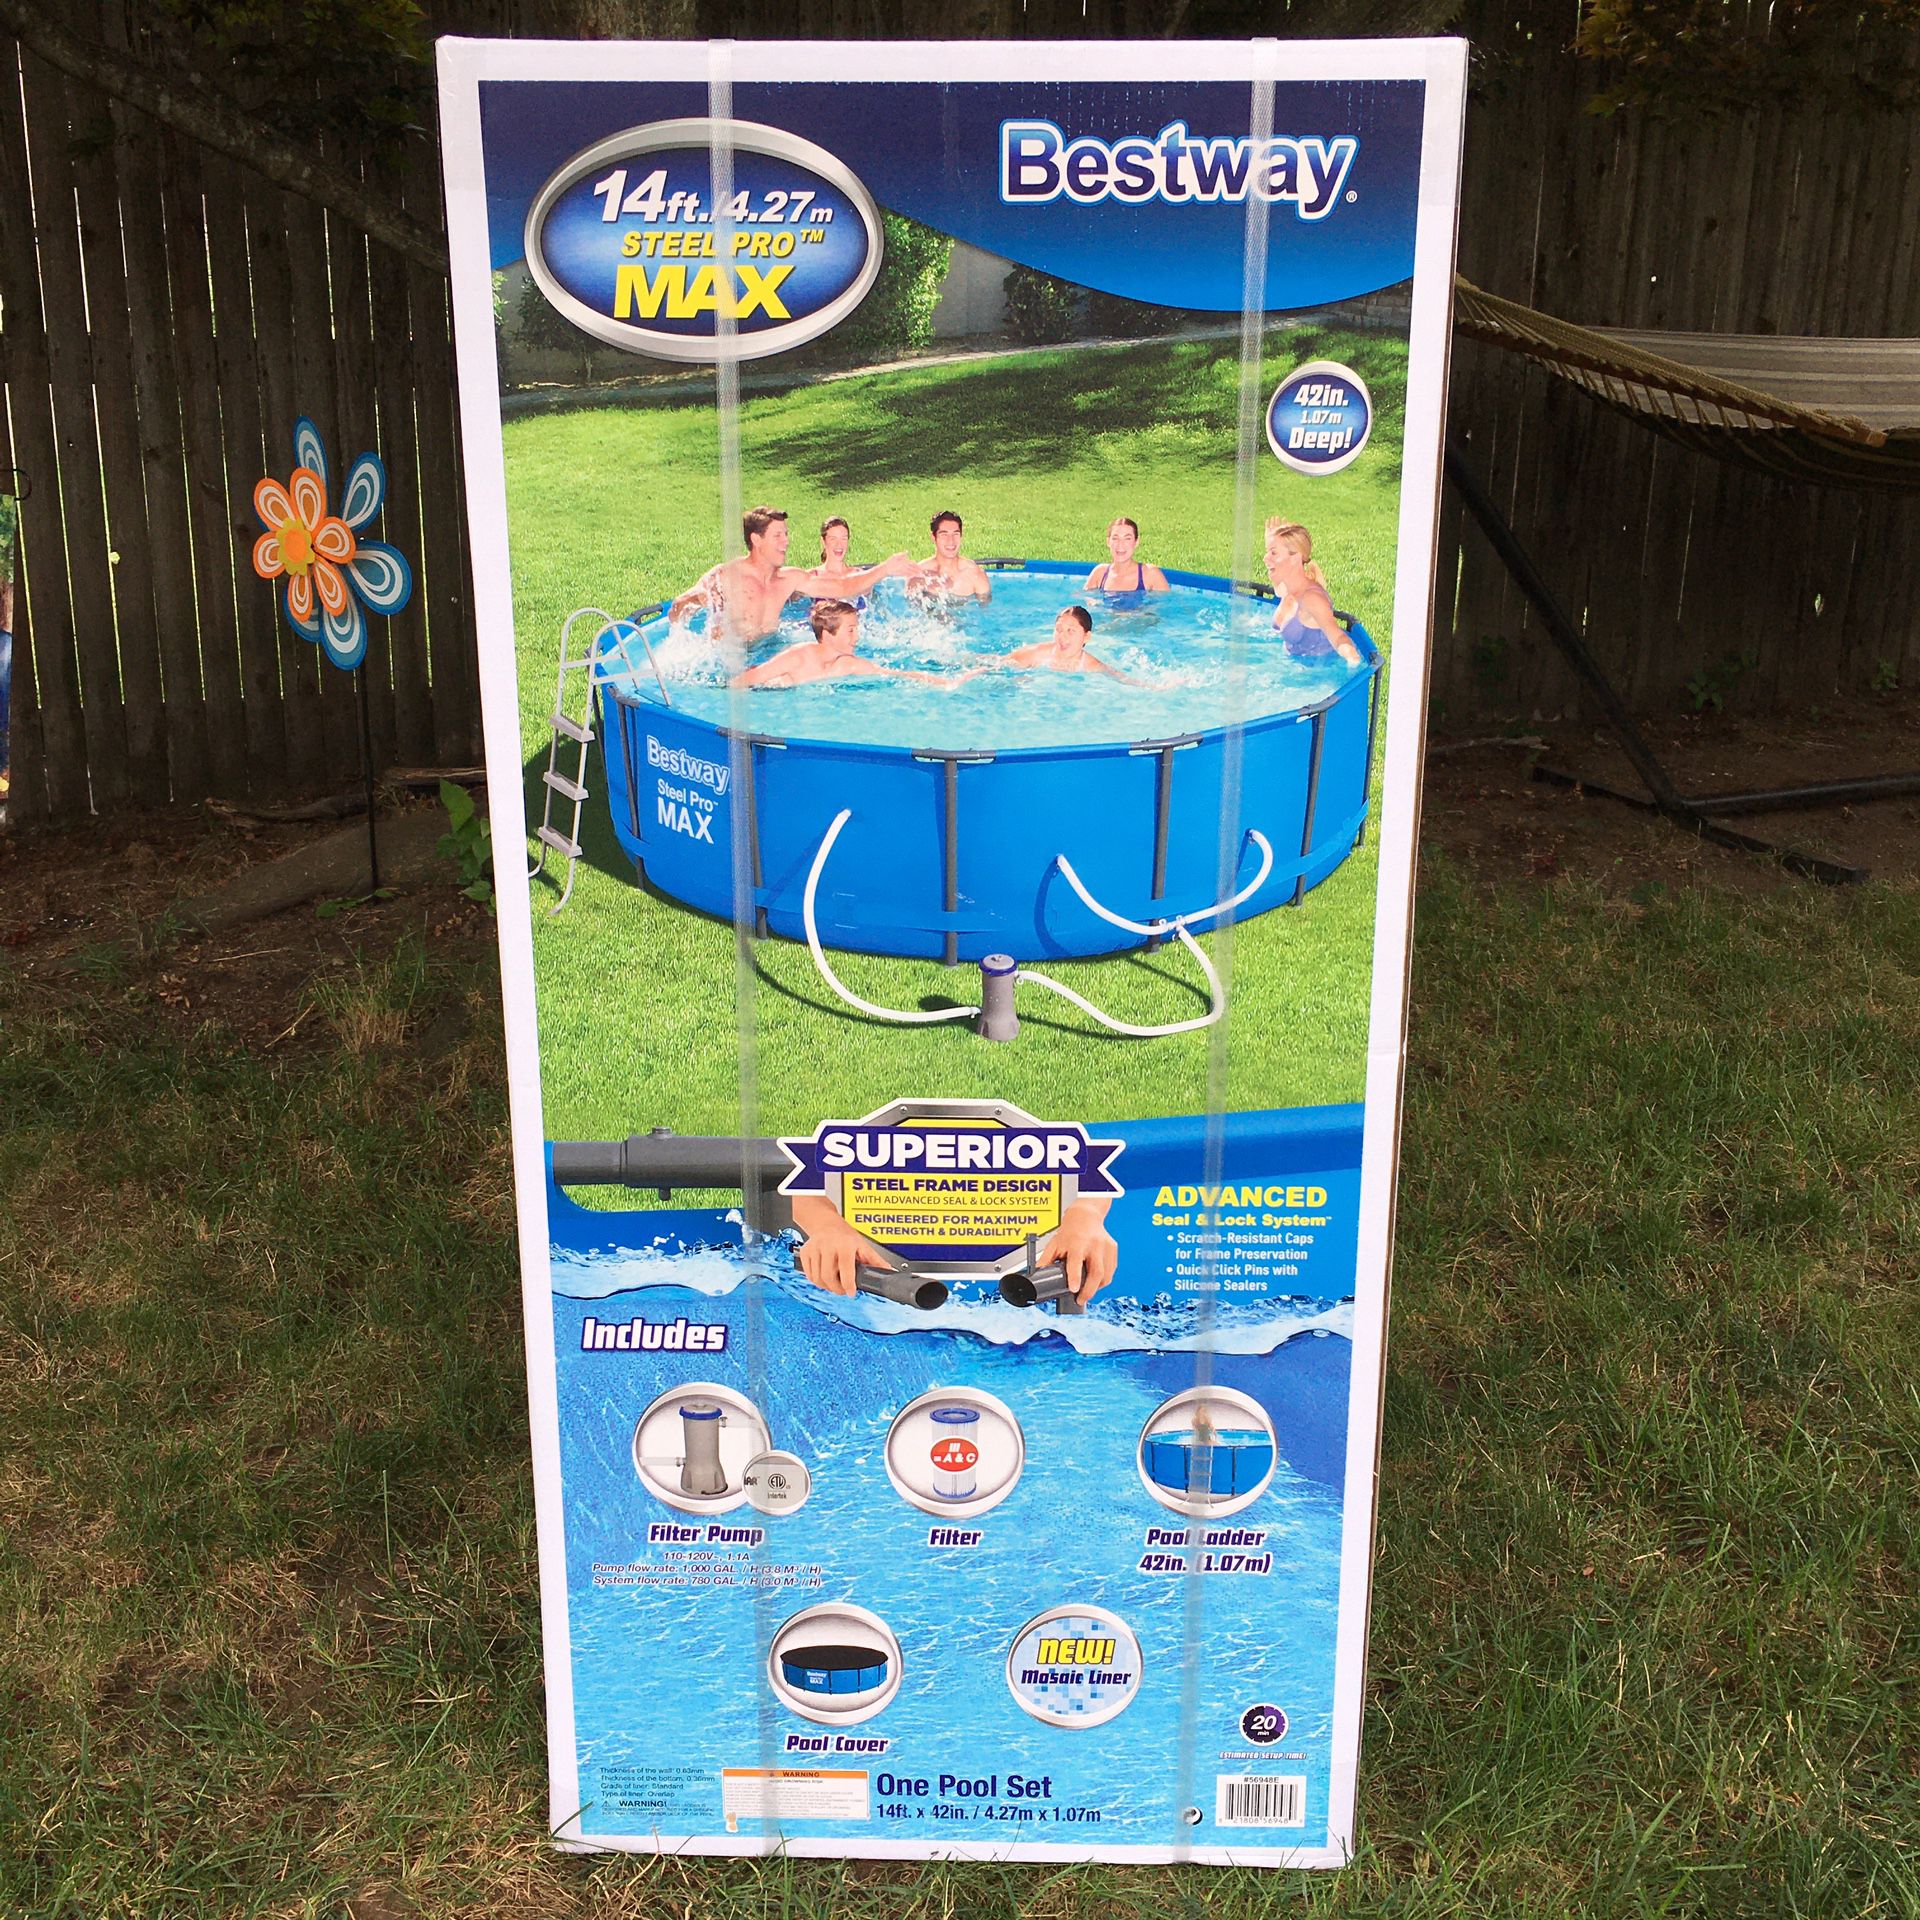 Bestway 14 Foot (14’x42”) Steel Pro Max Above Ground Swimming Pool